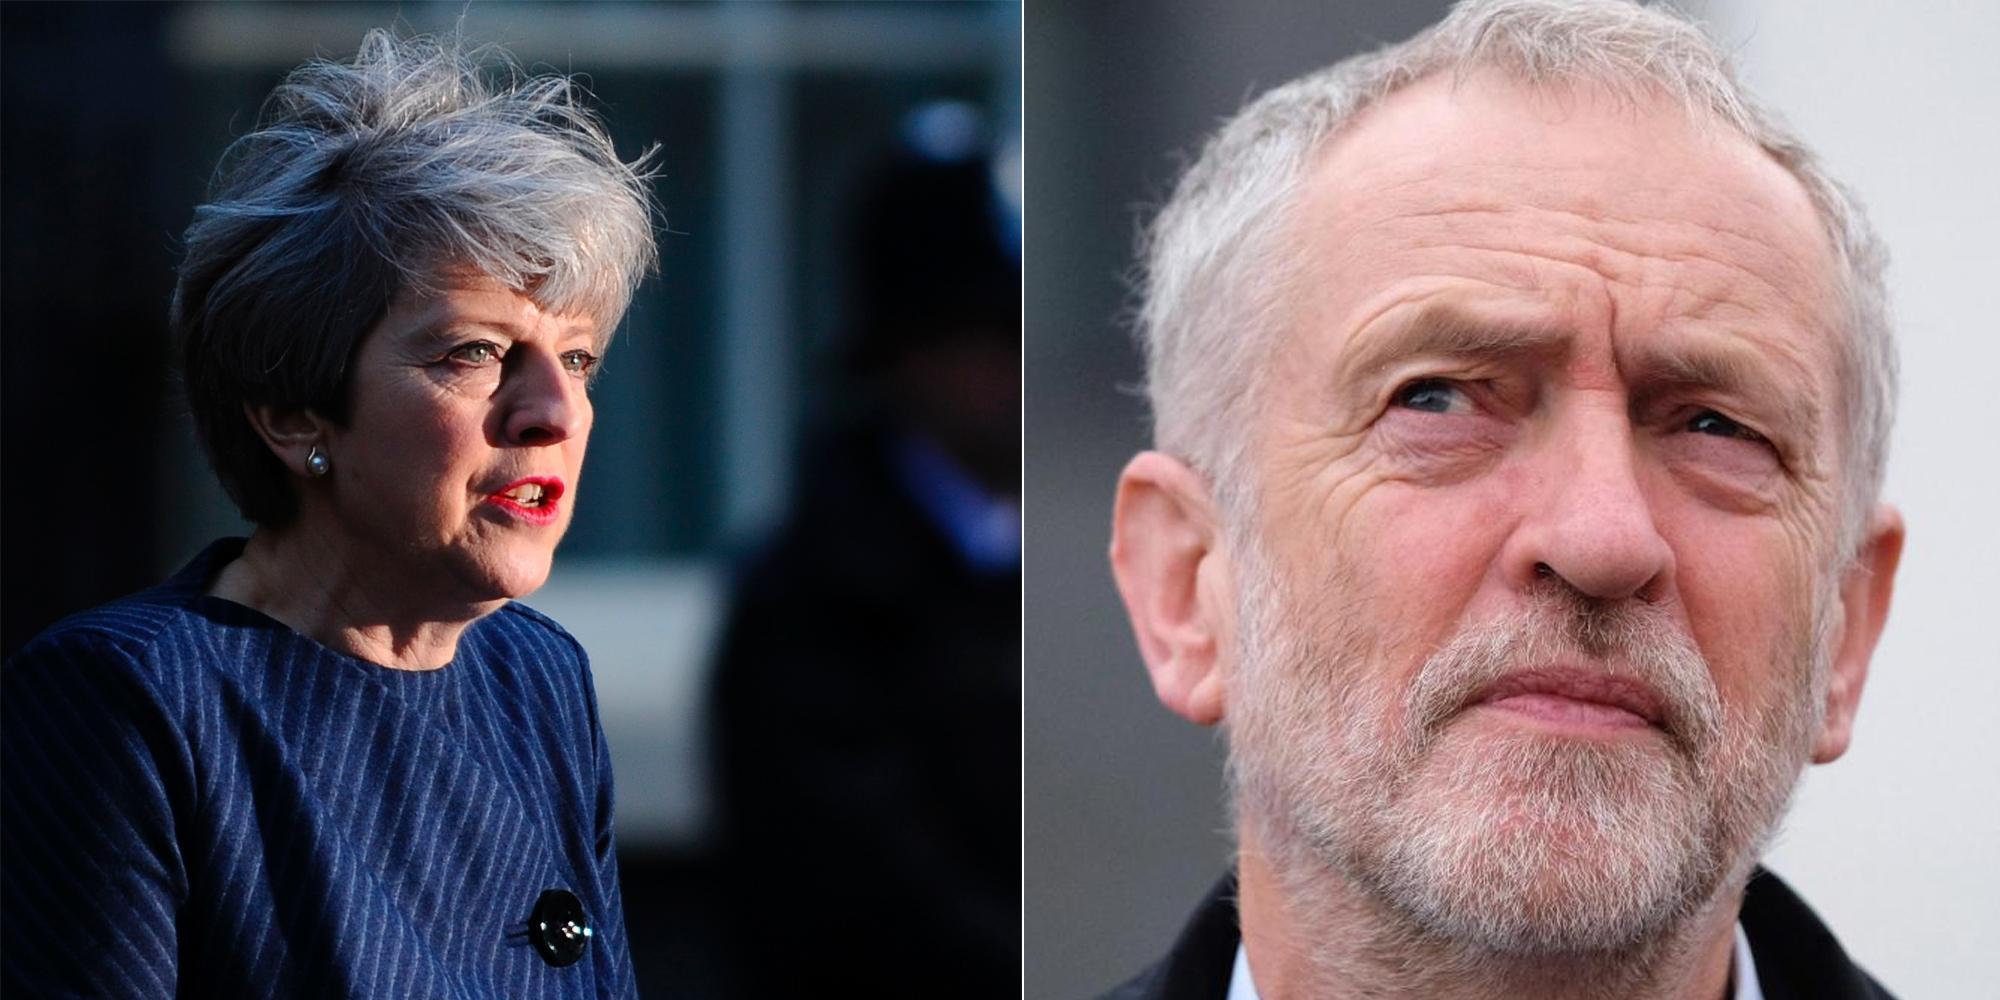 Jeremy Corbyn implied that his MPs would vote in favour of an early election, allowing Theresa May to bypass the Fixed Term Parliament rule